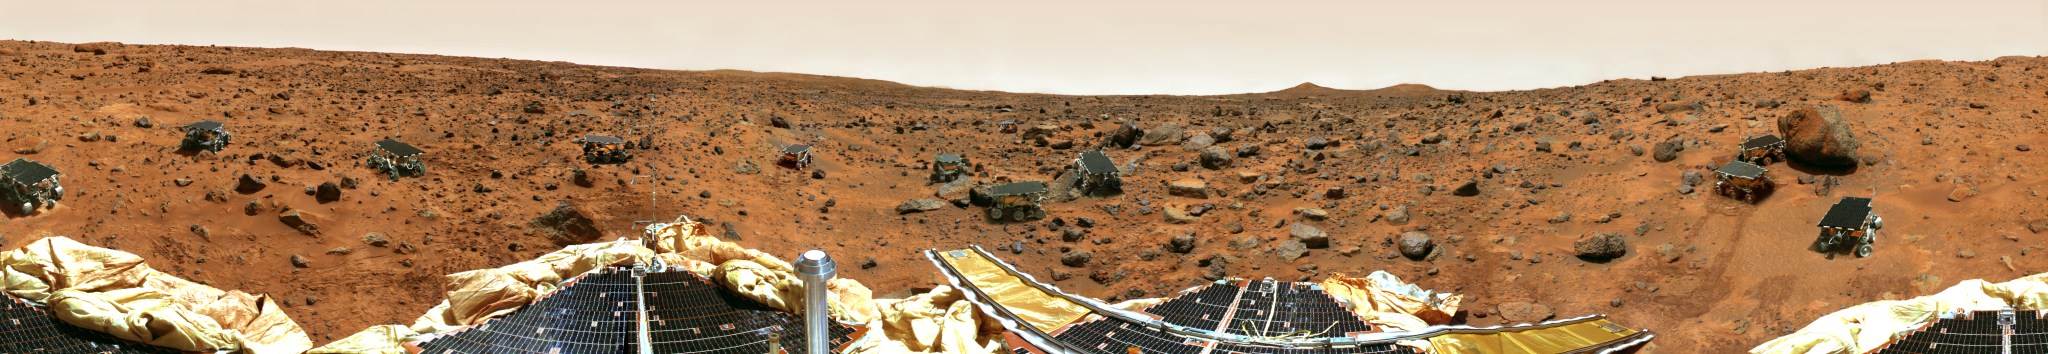 A composite of images taken by the Sojourner rover provides a panoramic view of the Martian landscape in 1997.